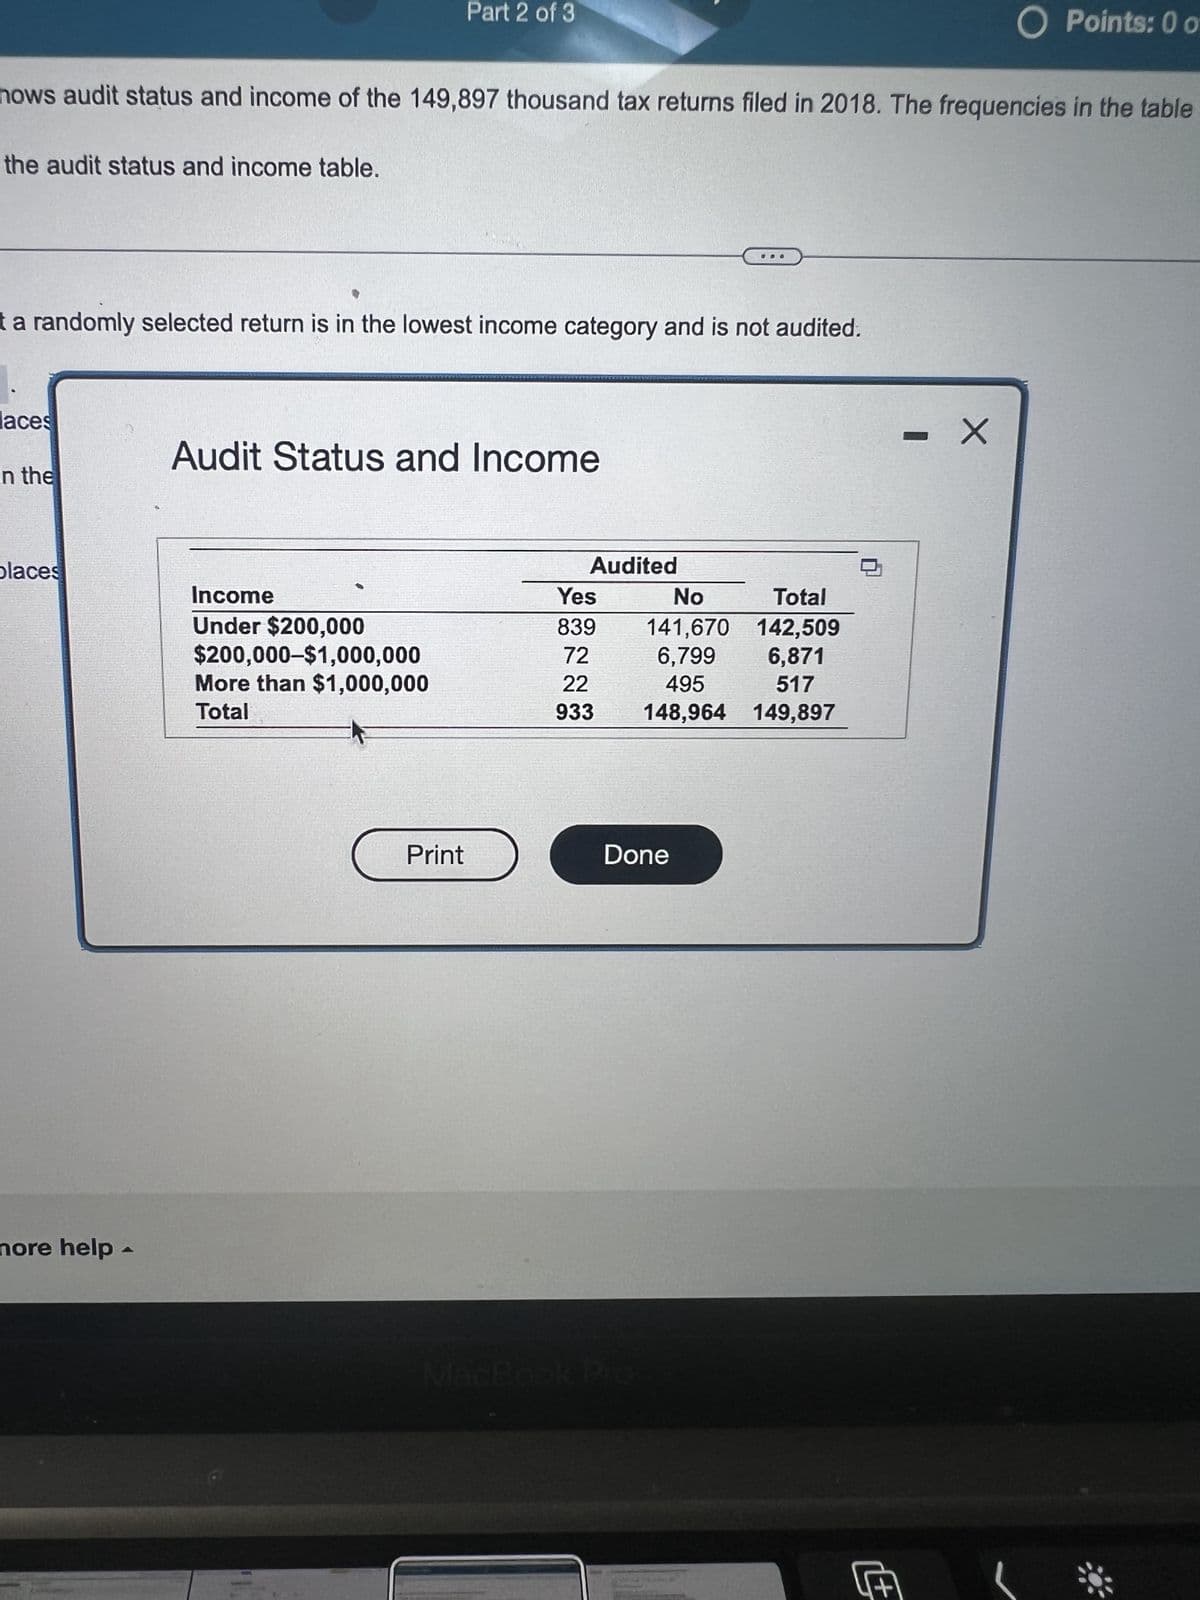 the audit status and income table.
hows audit status and income of the 149,897 thousand tax returns filed in 2018. The frequencies in the table
t a randomly selected return is in the lowest income category and is not audited.
aces
in the
places
nore help -
Part 2 of 3
Audit Status and Income
Income
Under $200,000
$200,000-$1,000,000
More than $1,000,000
Total
Print
Audited
Yes
No
Total
839
141,670 142,509
72
6,799
6,871
22
517
495
933 148,964
149,897
Done
O Points: 0 o
- X